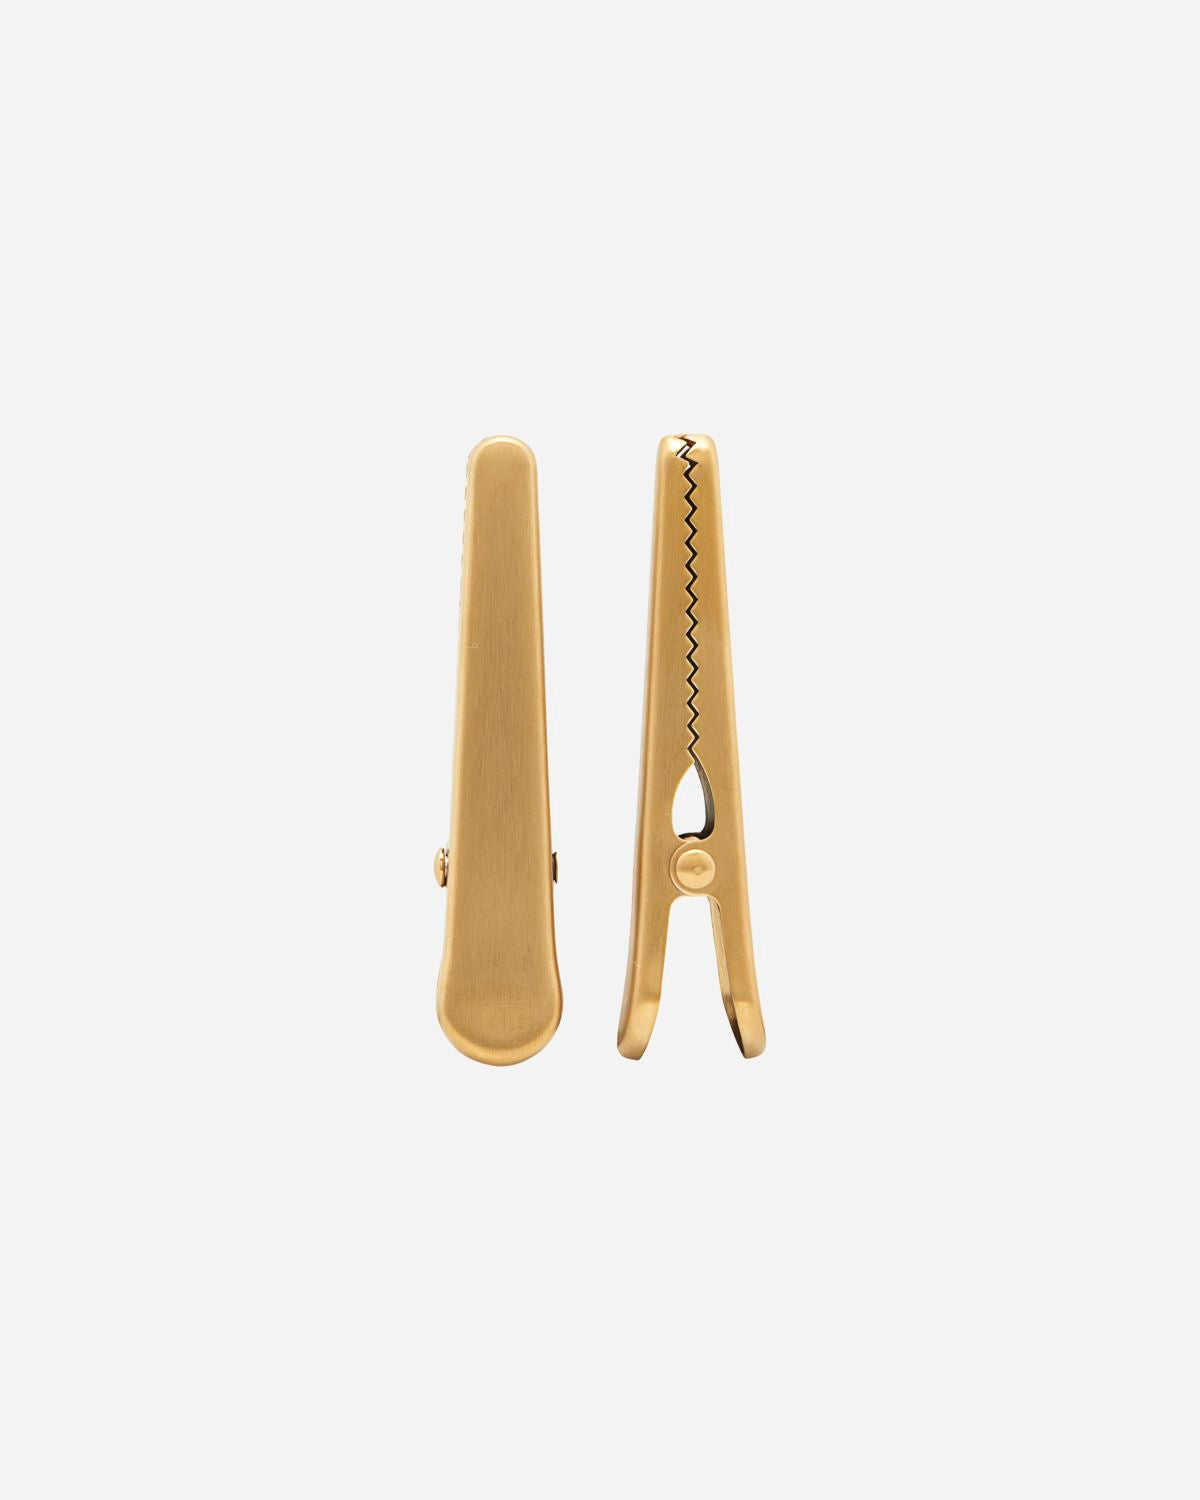 Clips | Set of 2 | 8cm | Gold | by Monograph - Lifestory - Monograph